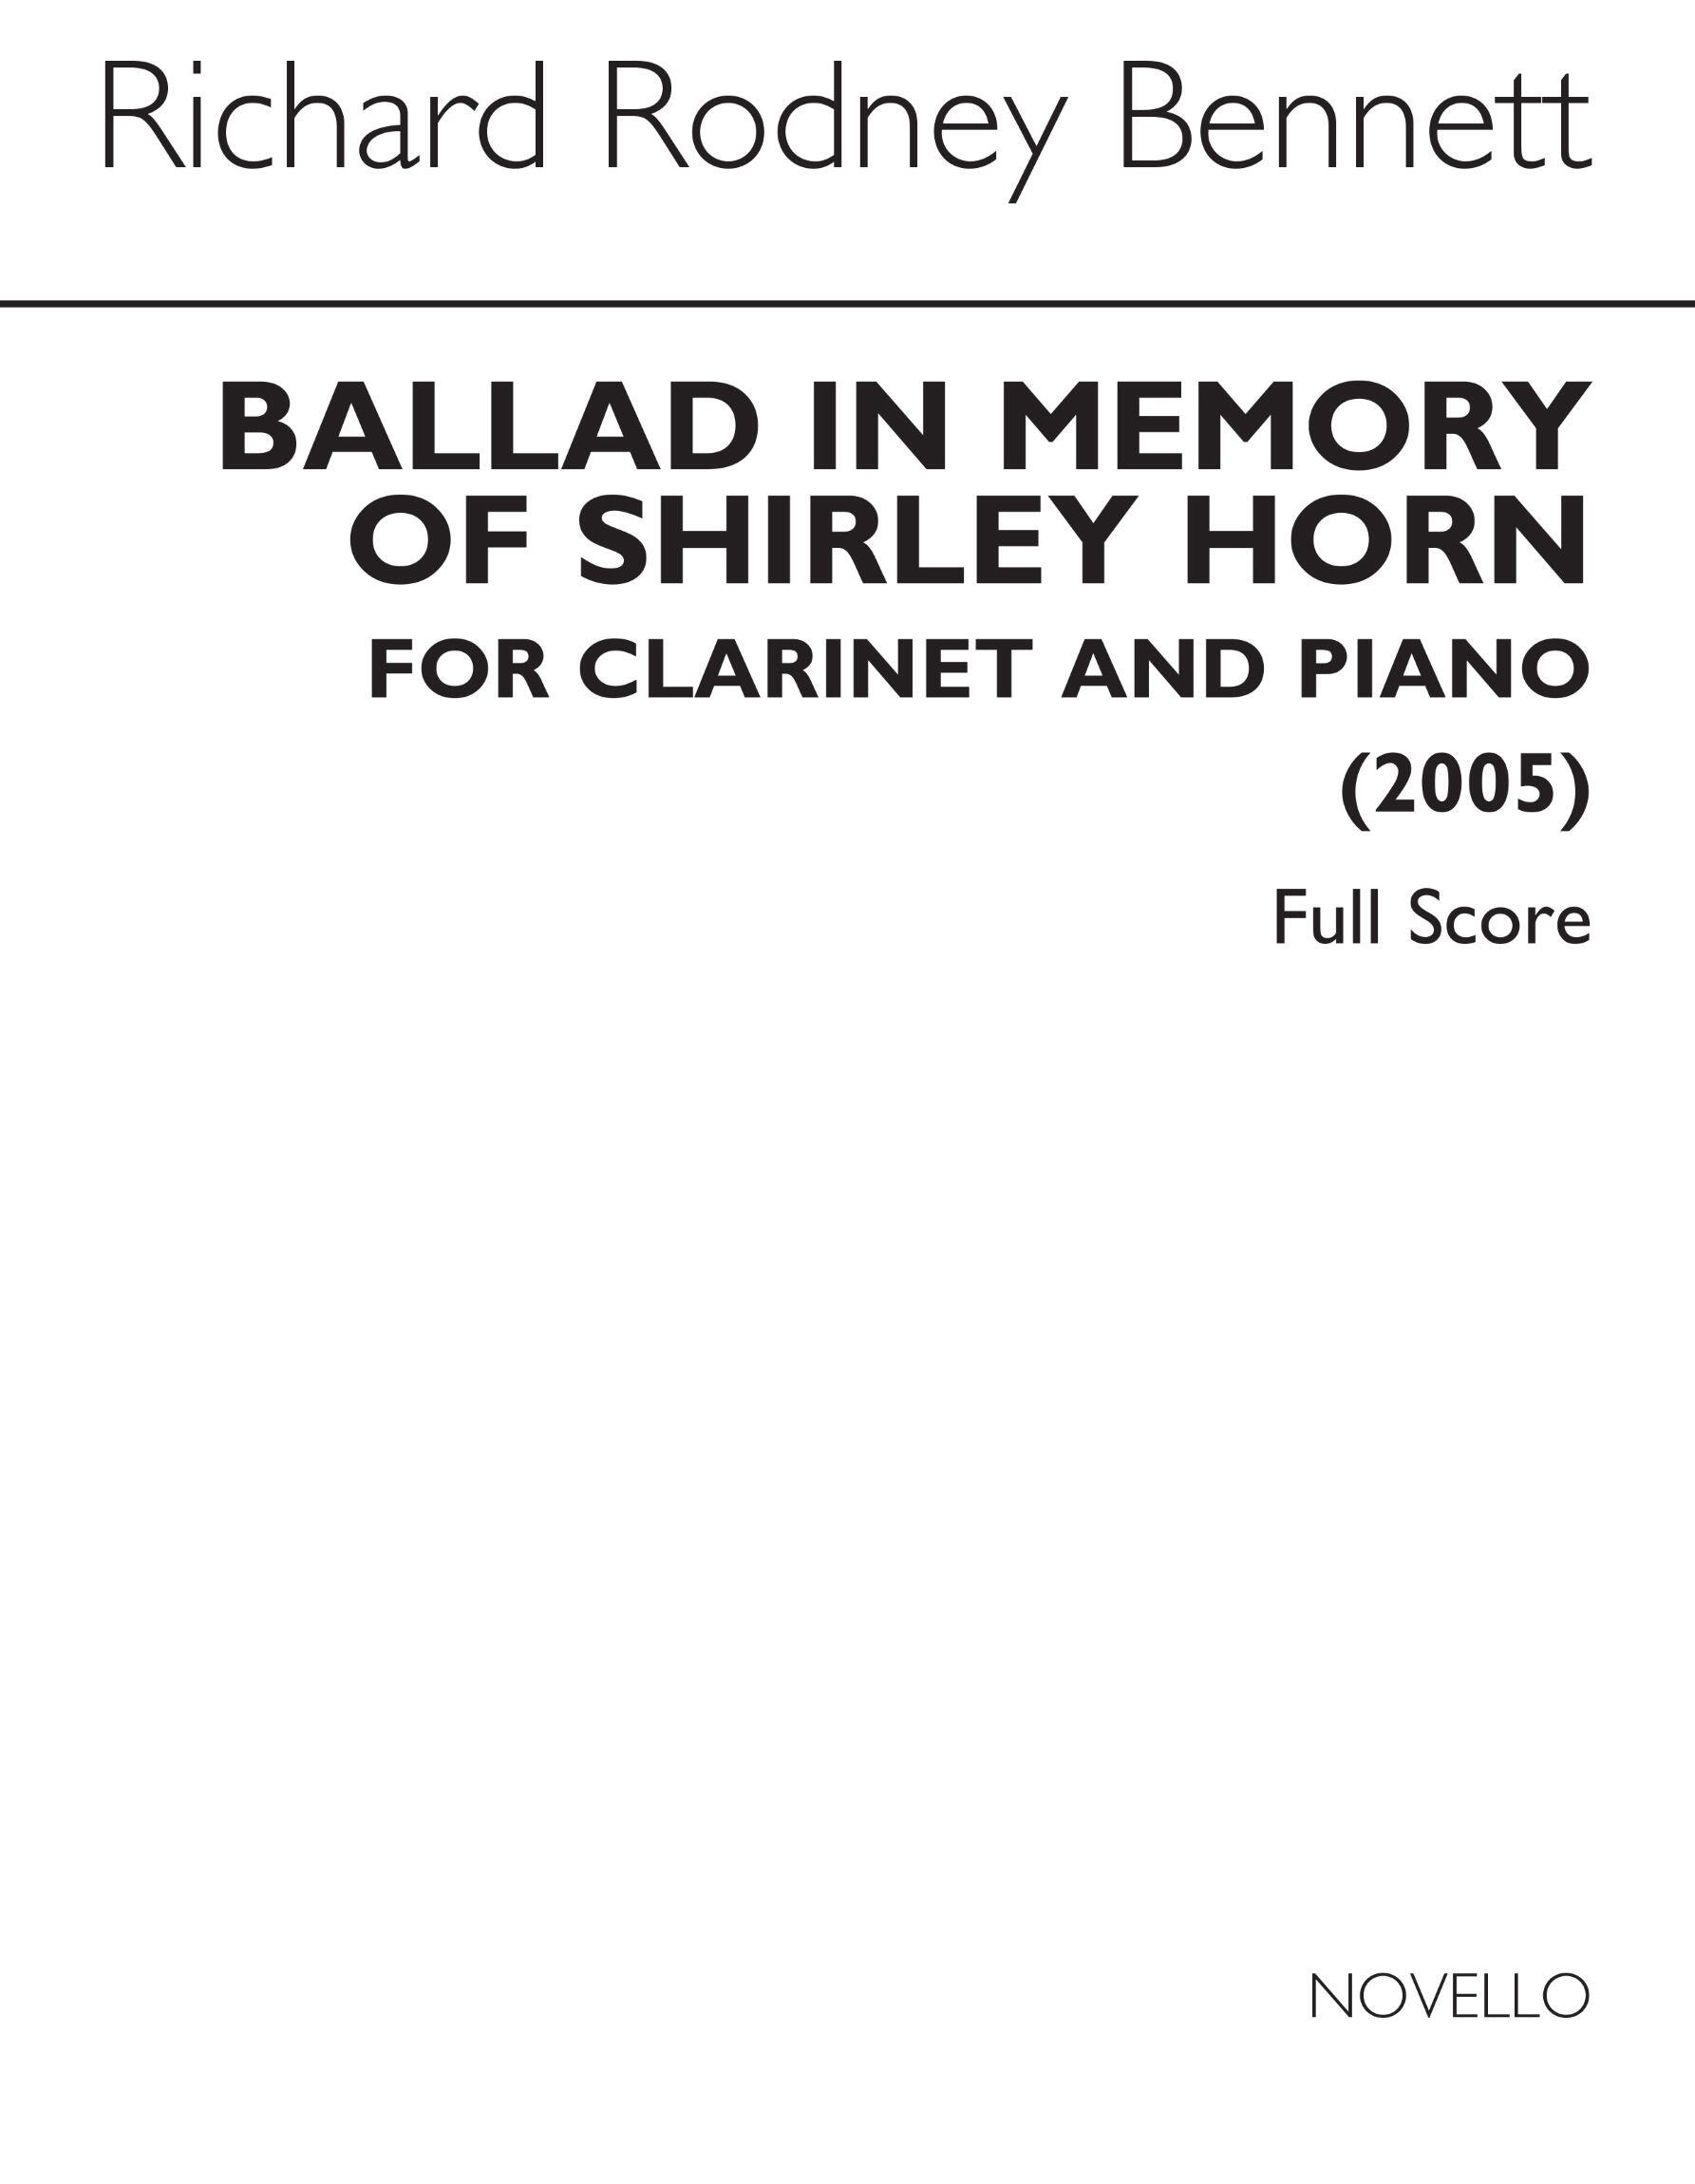 Ballad In Memory Of Shirley Horn : photo 1